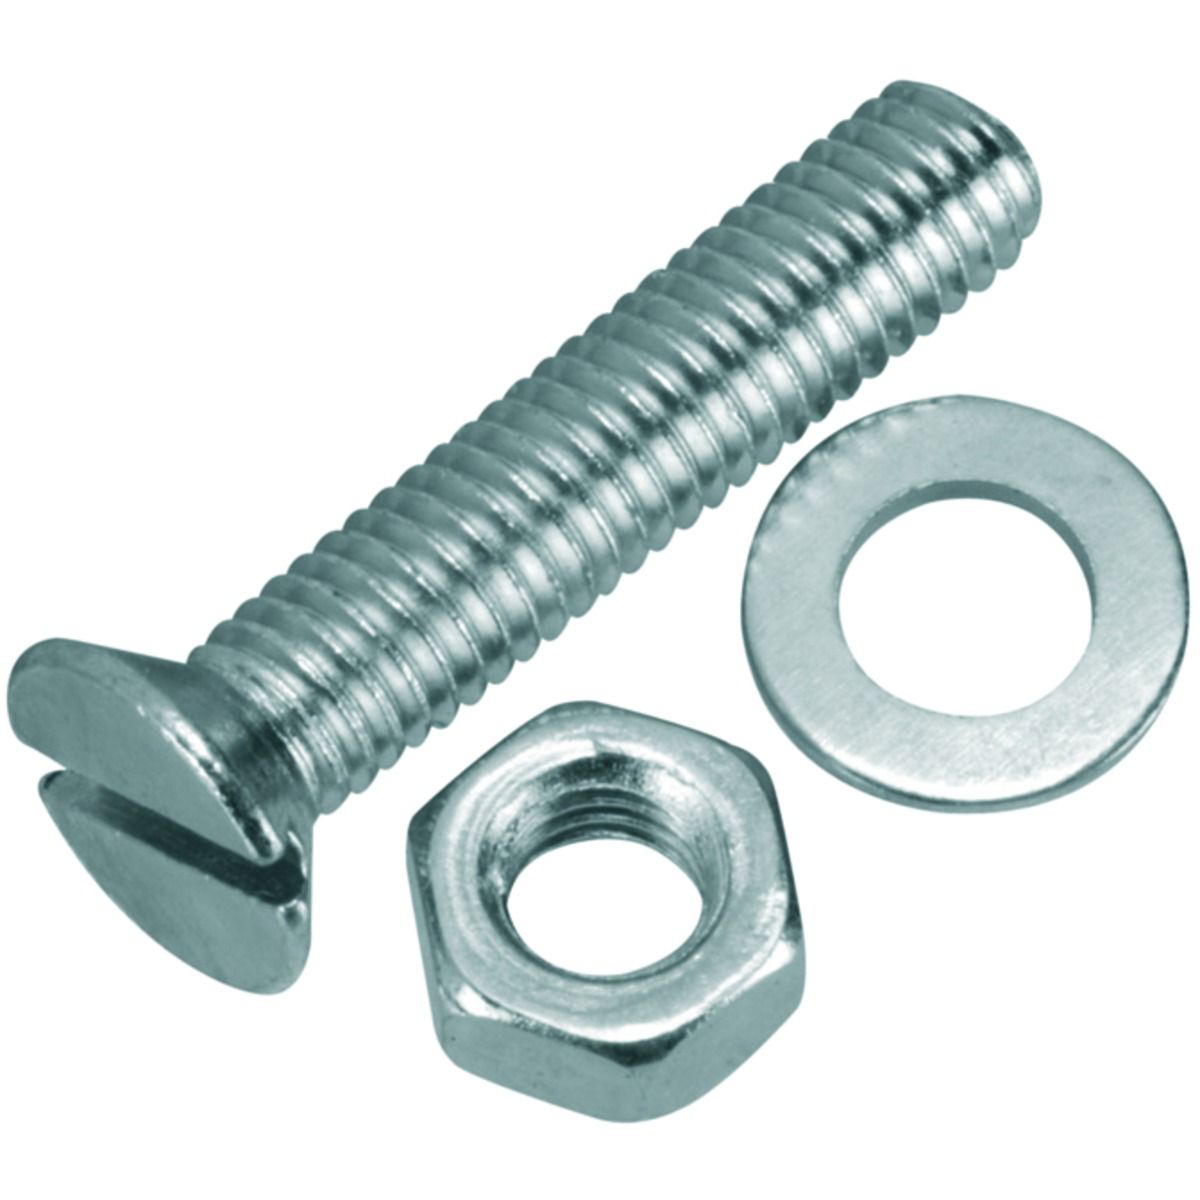 Image of Wickes Machine Screws with Slot Head, Nut & Washer - M5 x 25mm Pack of 8